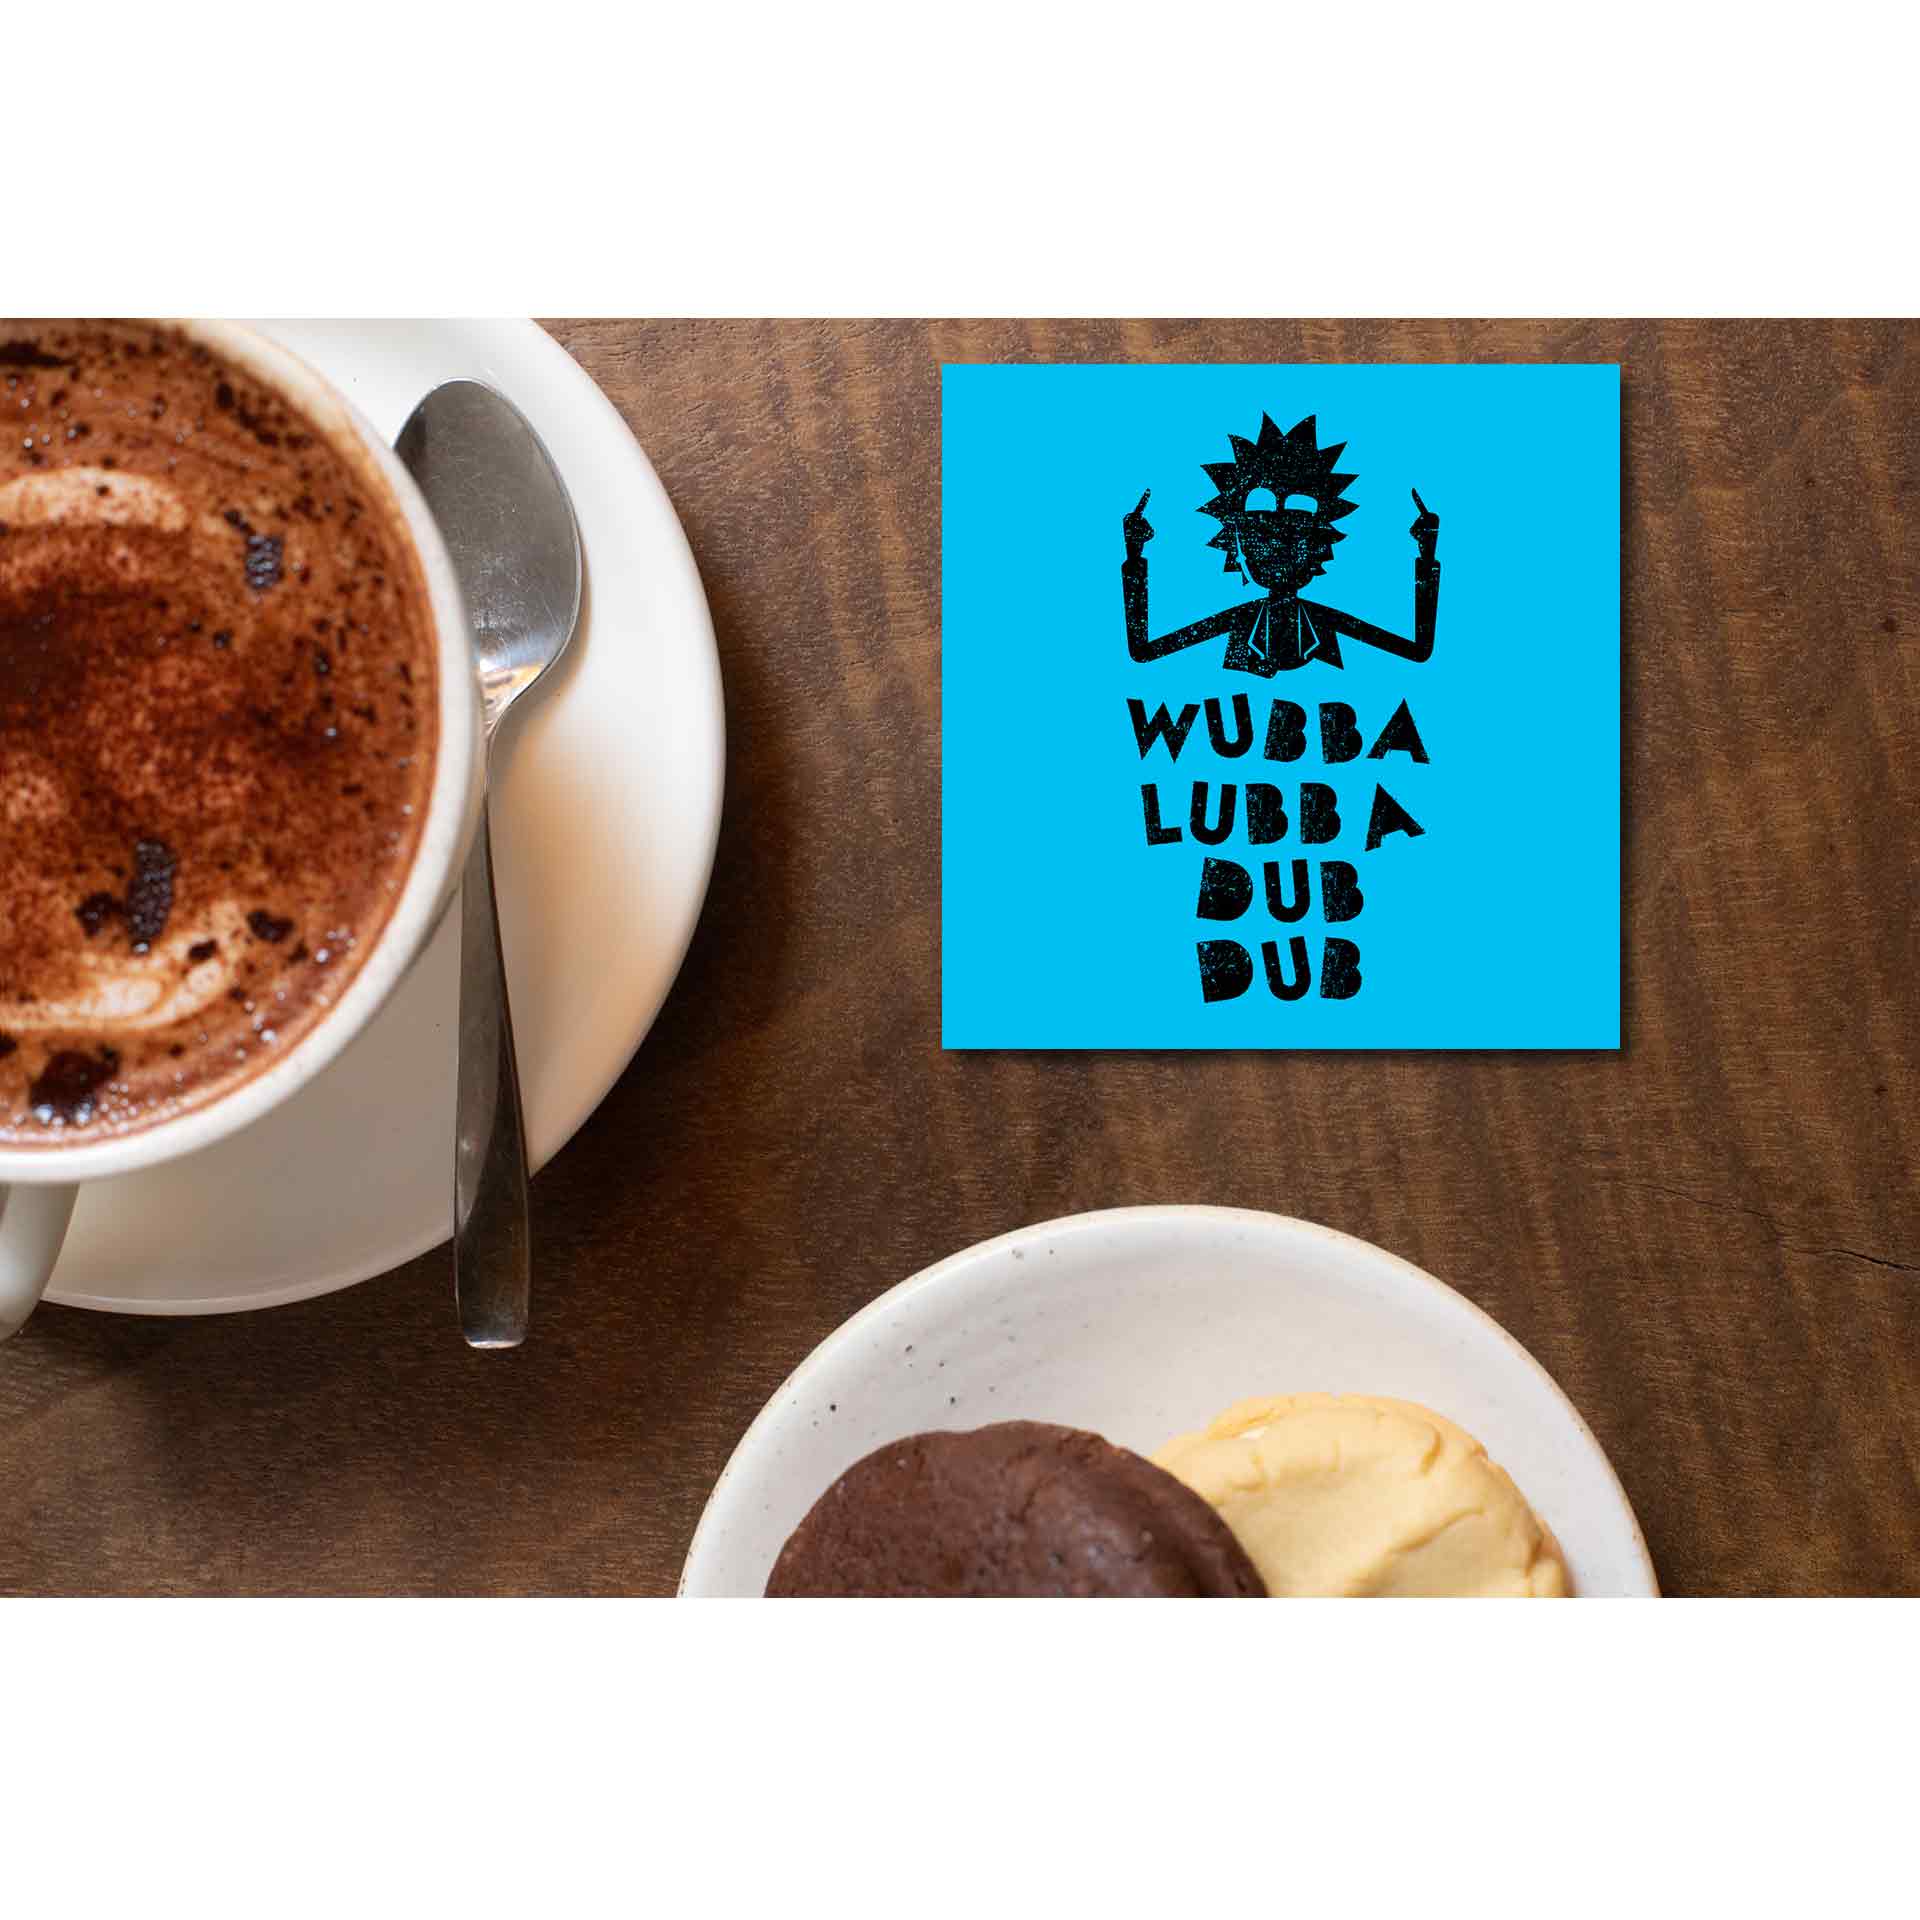 rick and morty wubba lubba dub dub coasters wooden table cups indian buy online india the banyan tee tbt men women girls boys unisex  rick and morty online summer beth mr meeseeks jerry quote vector art clothing accessories merchandise